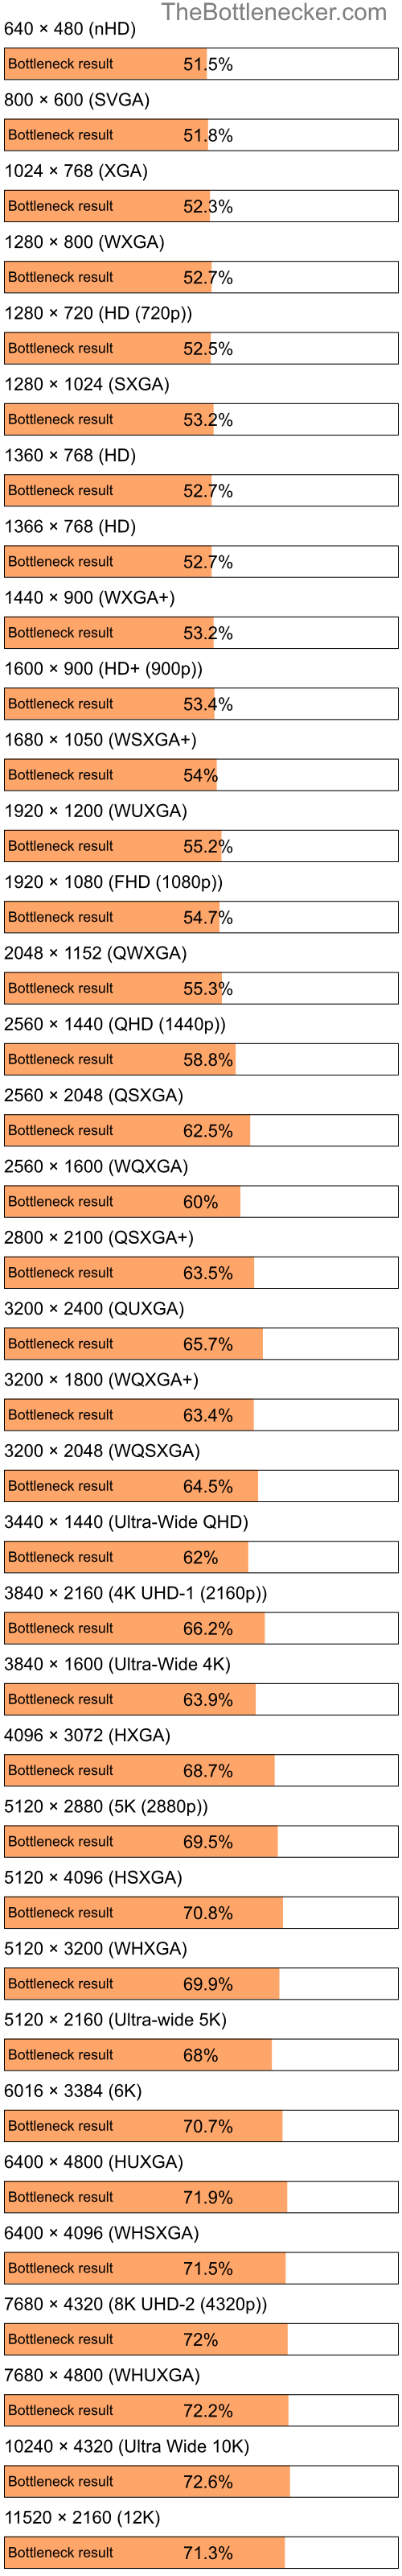 Bottleneck results by resolution for Intel Pentium 4 and NVIDIA GeForce GT 320M in Processor Intense Tasks